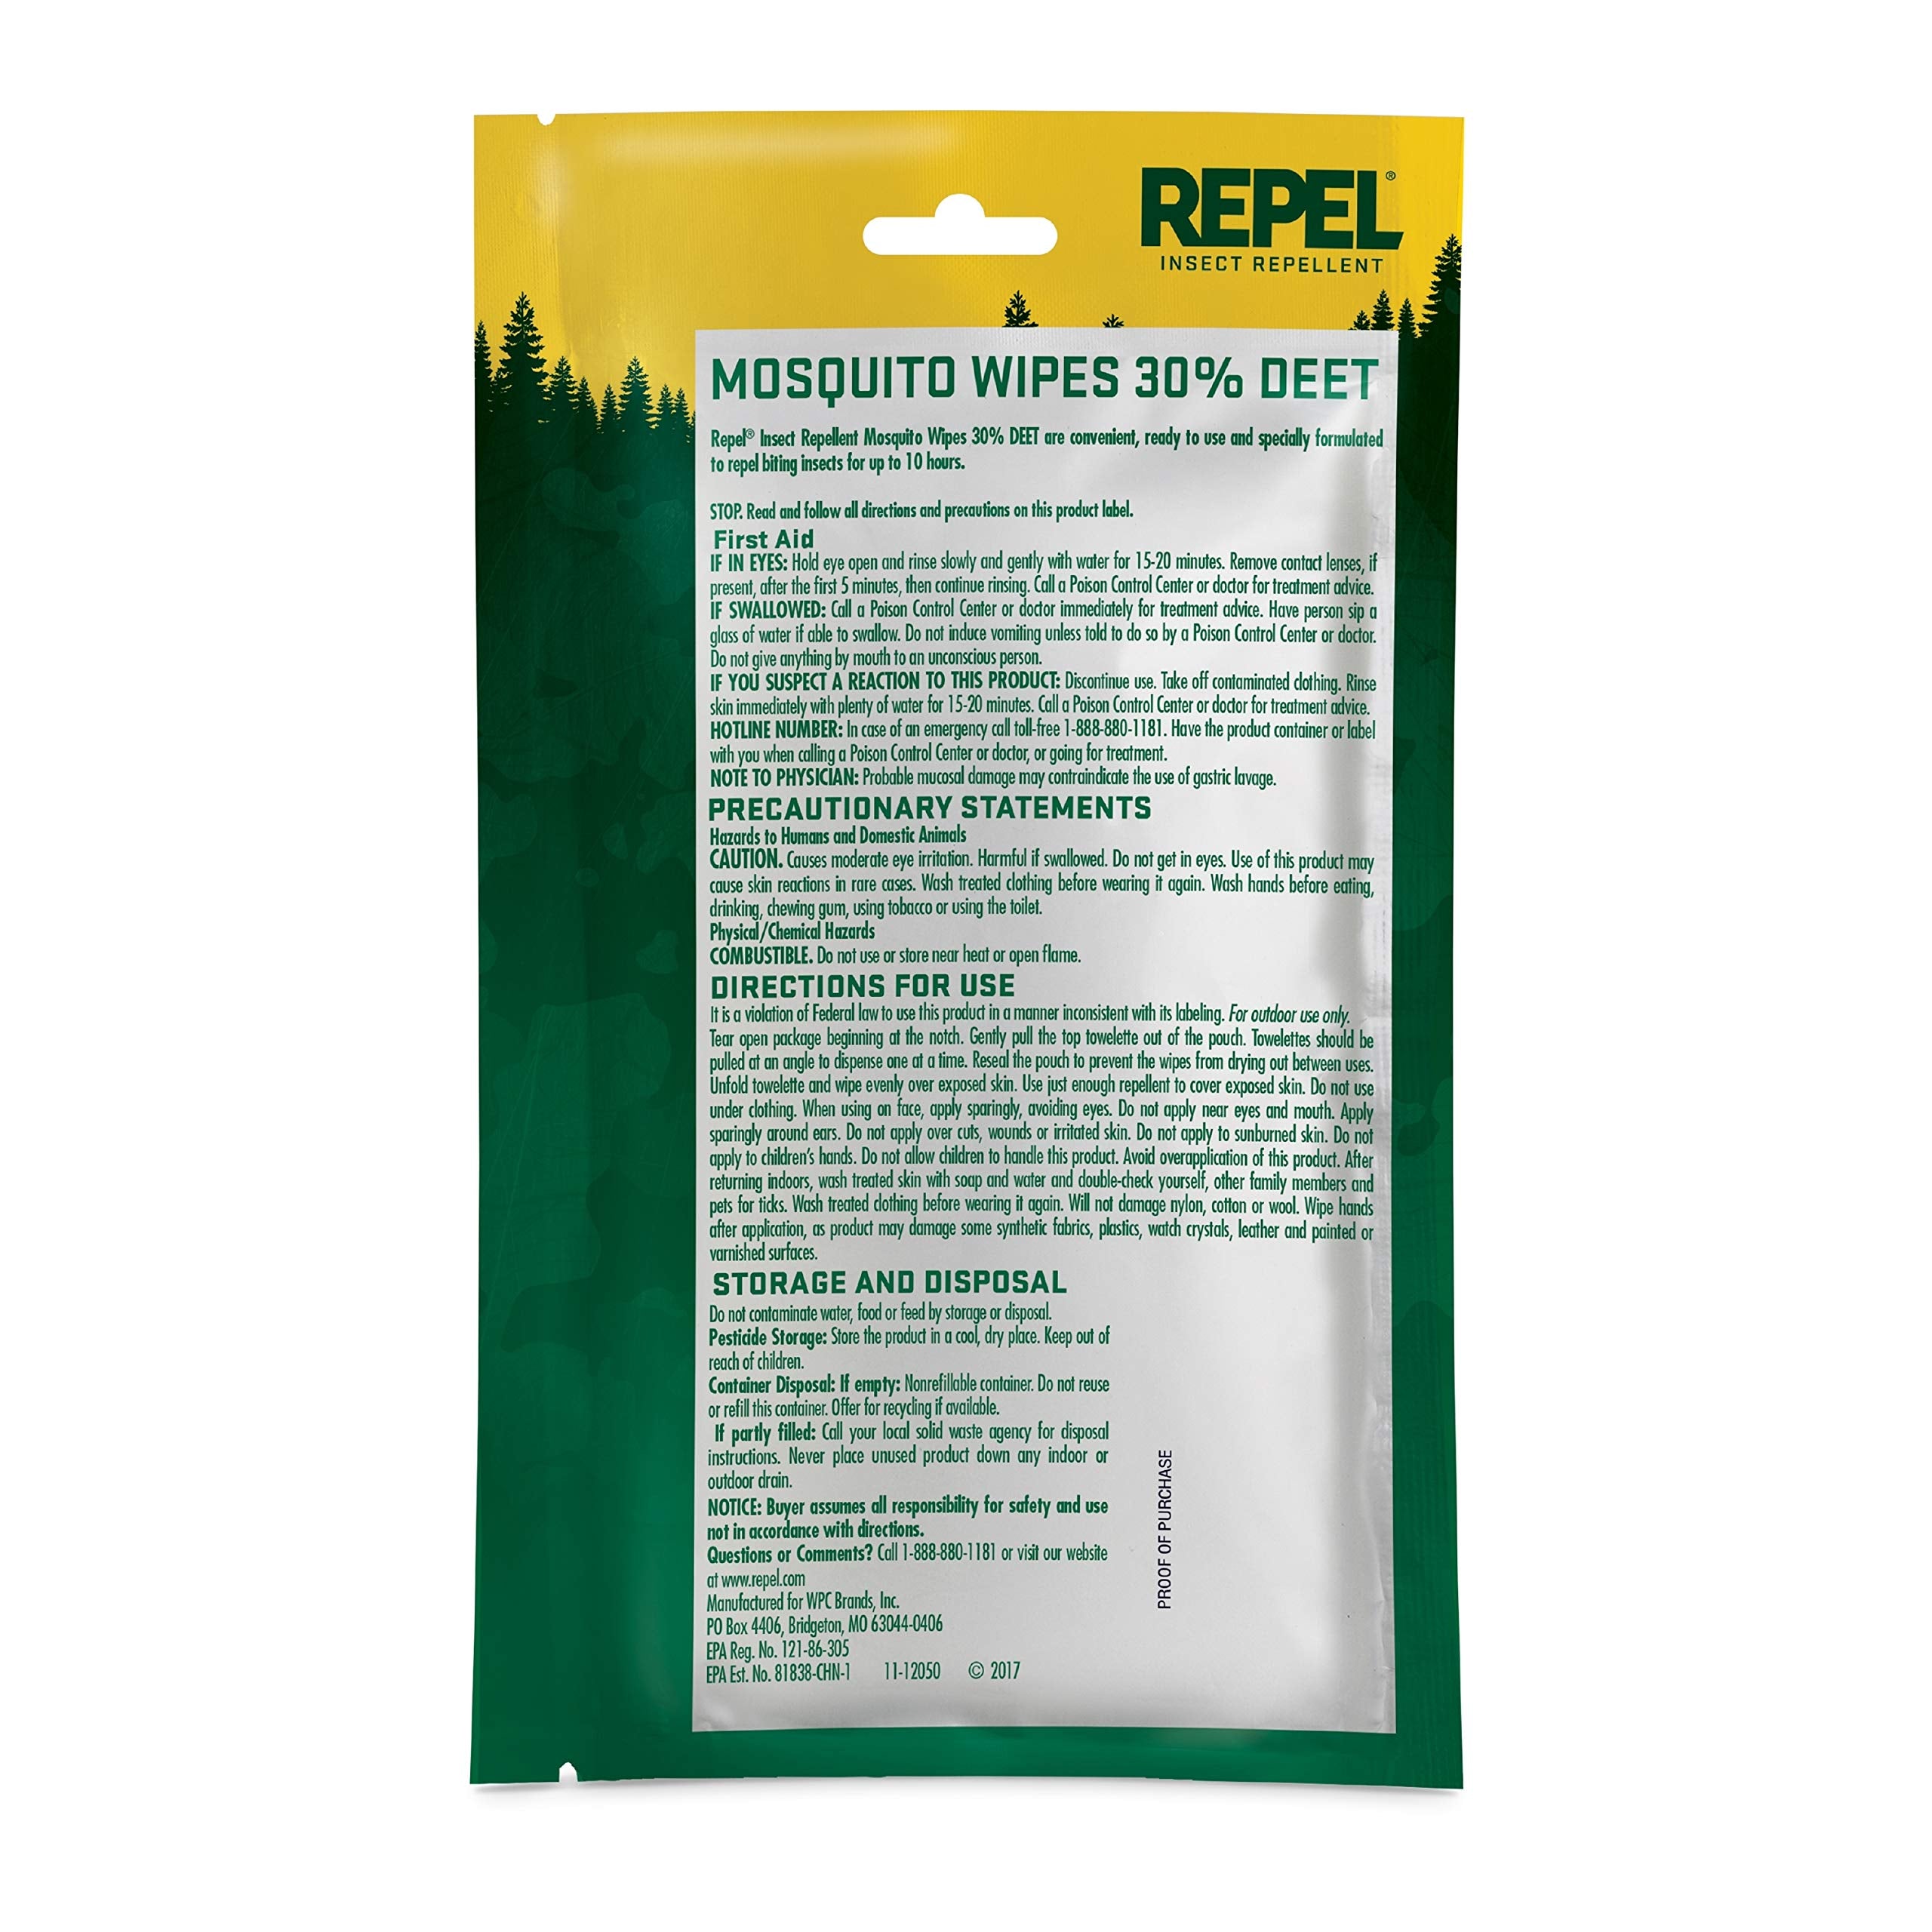 Repel Insect Repellent Mosquito Wipes with 30% DEET - 15 Count Travel Pack, Peppermint & Citronella Scented